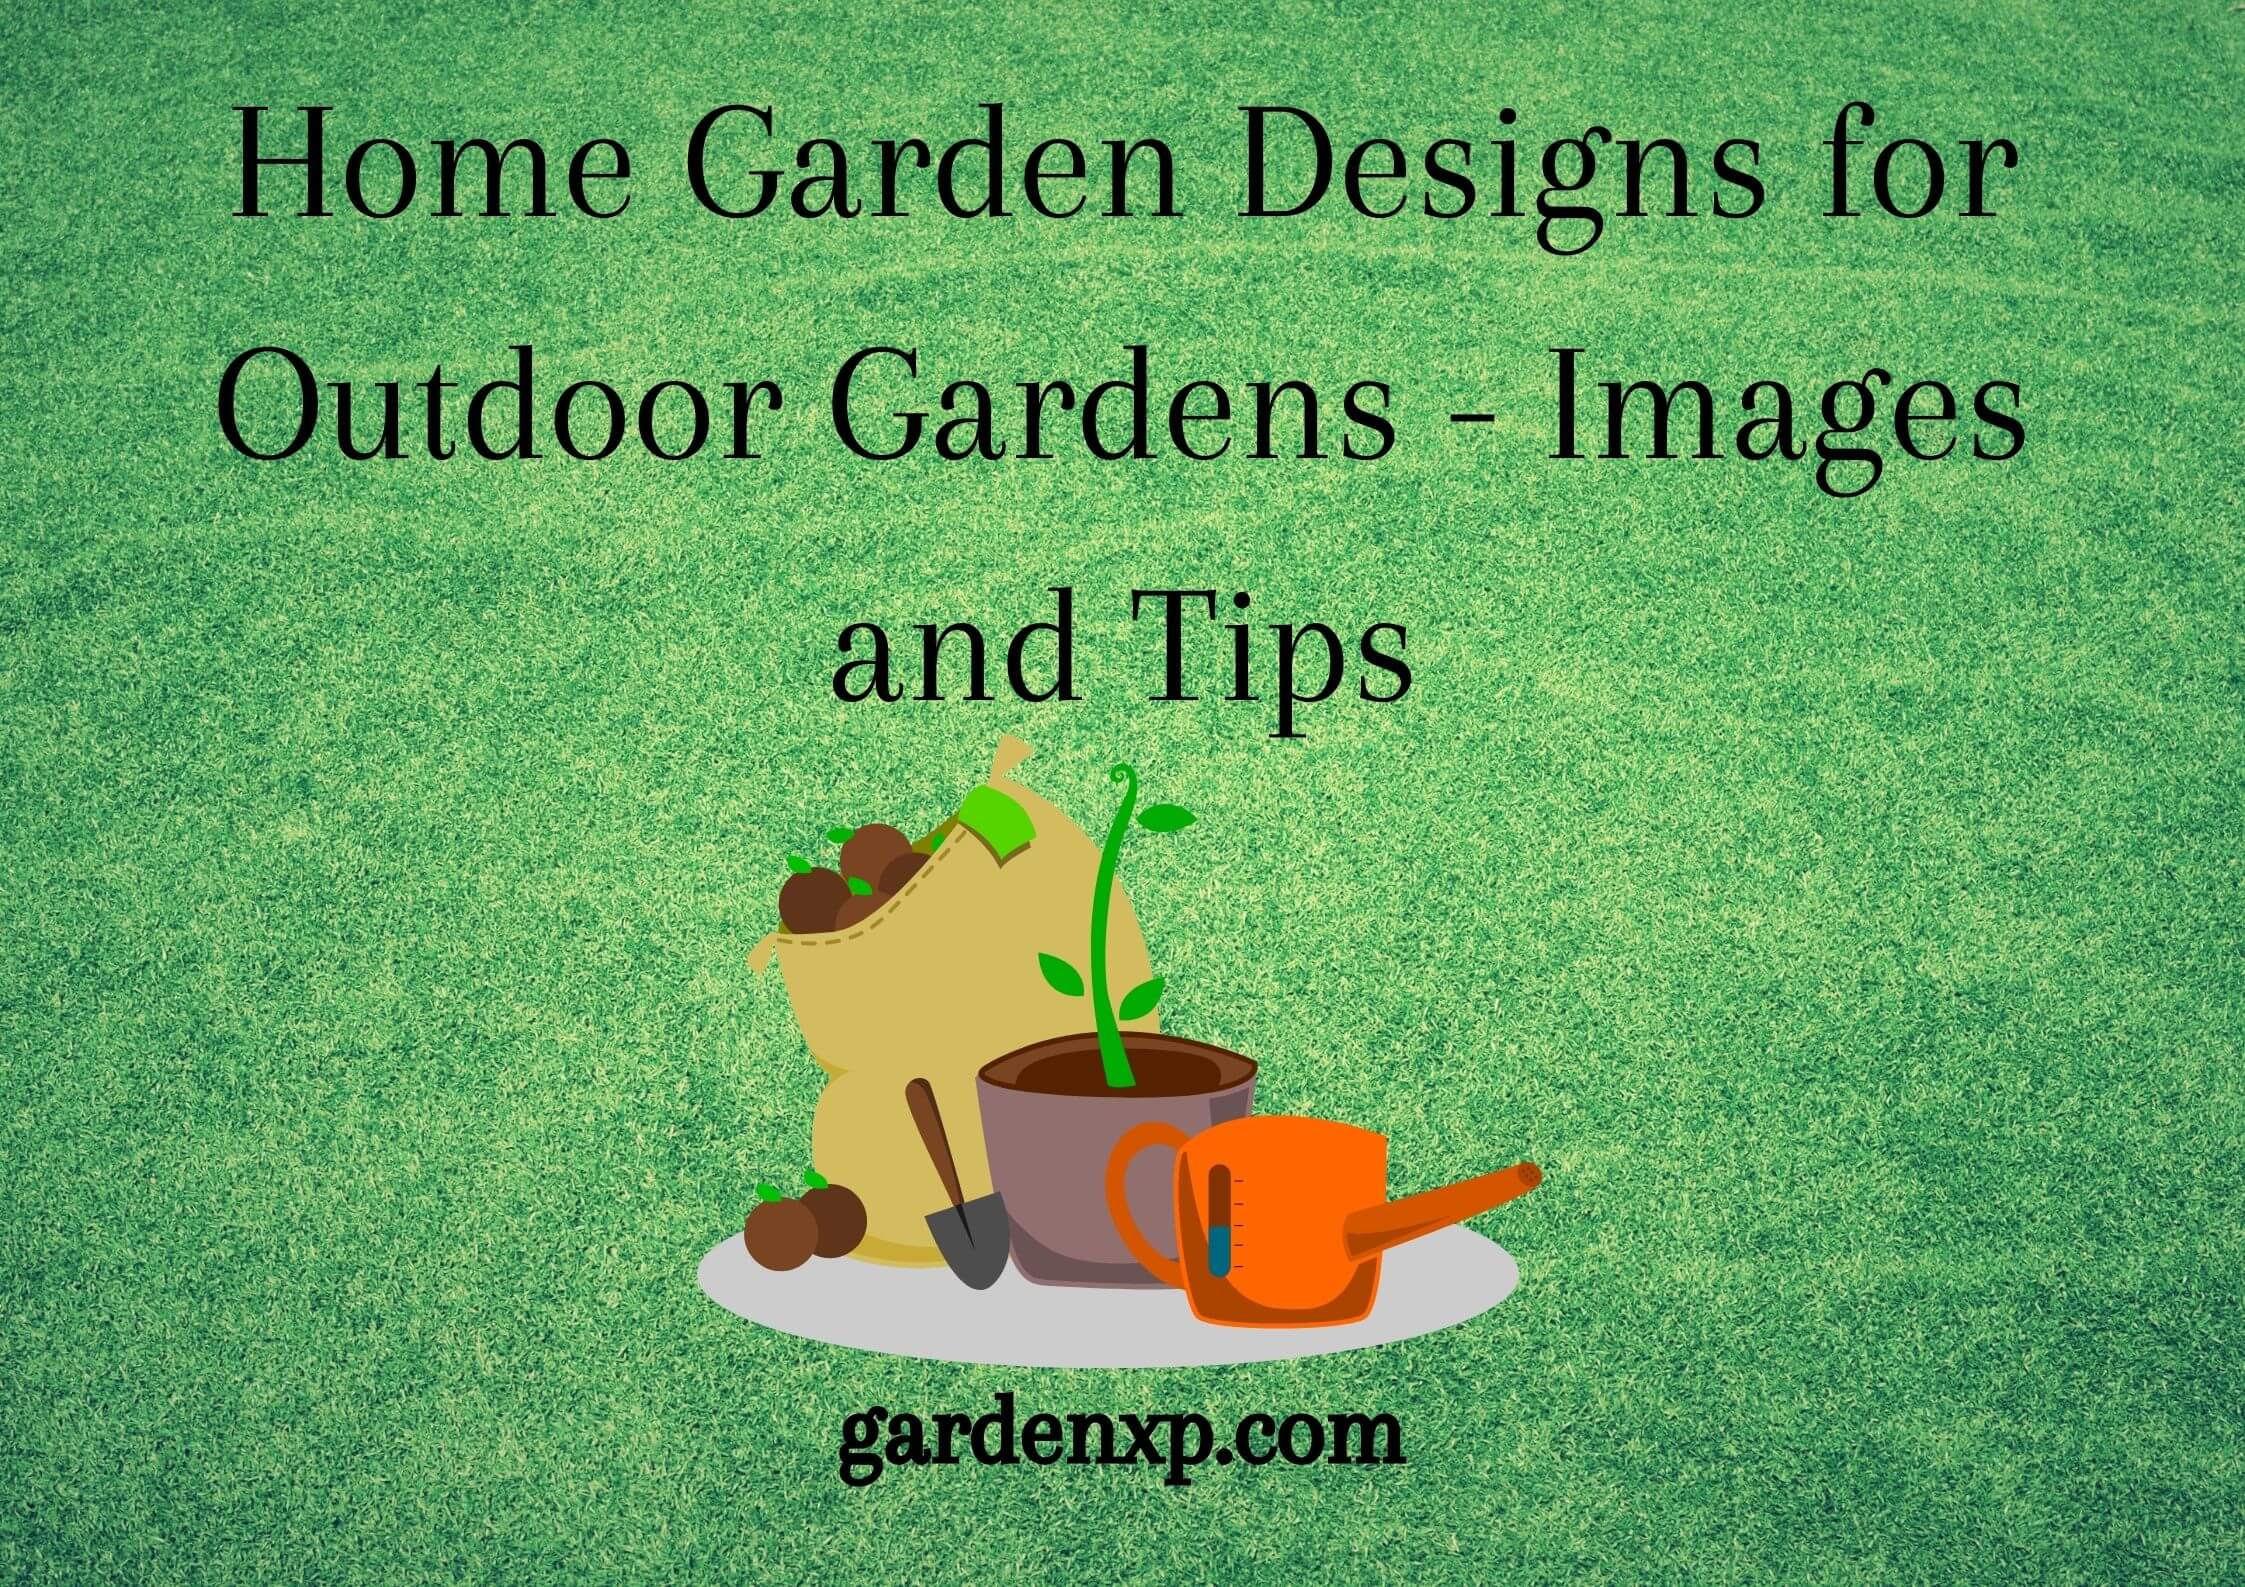 Home Garden Designs for Outdoor Gardens - Images and Tips